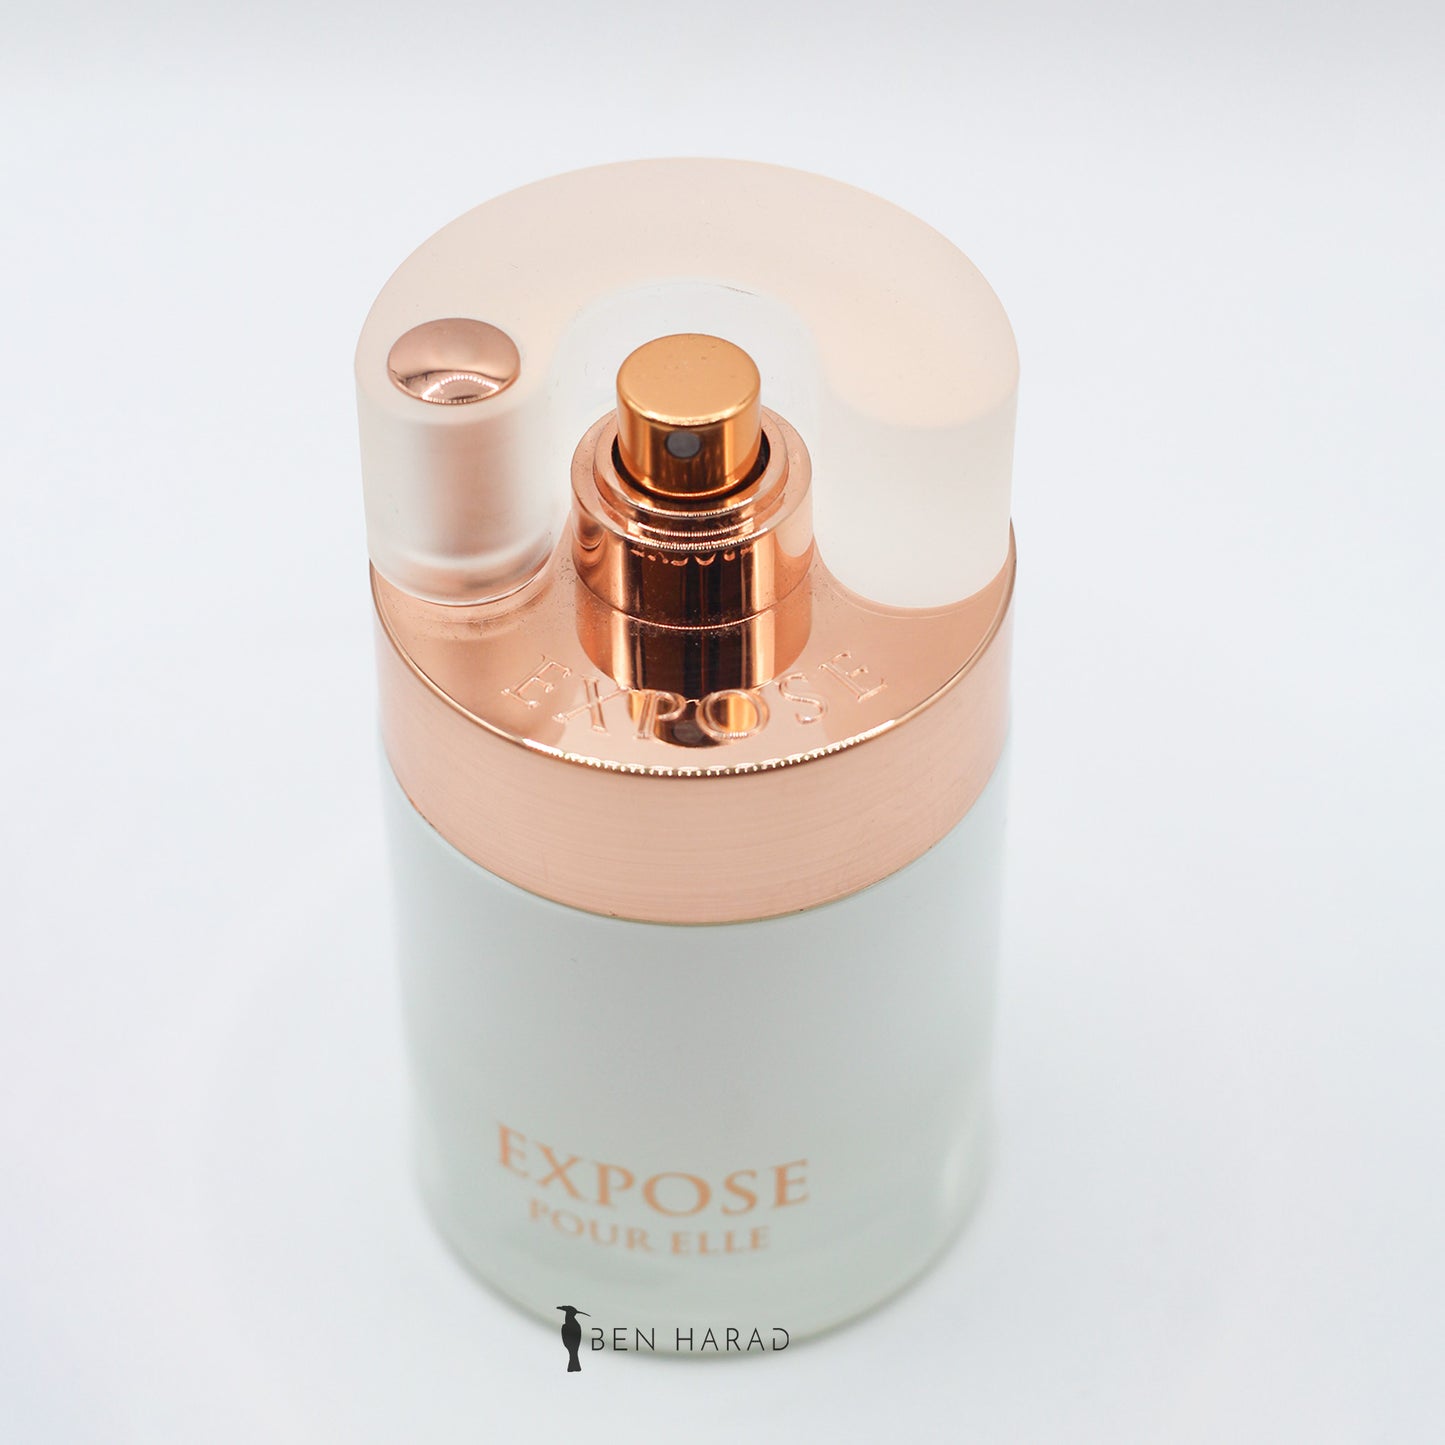 Expose Pour Elle 100ml EDP by Fragrance World